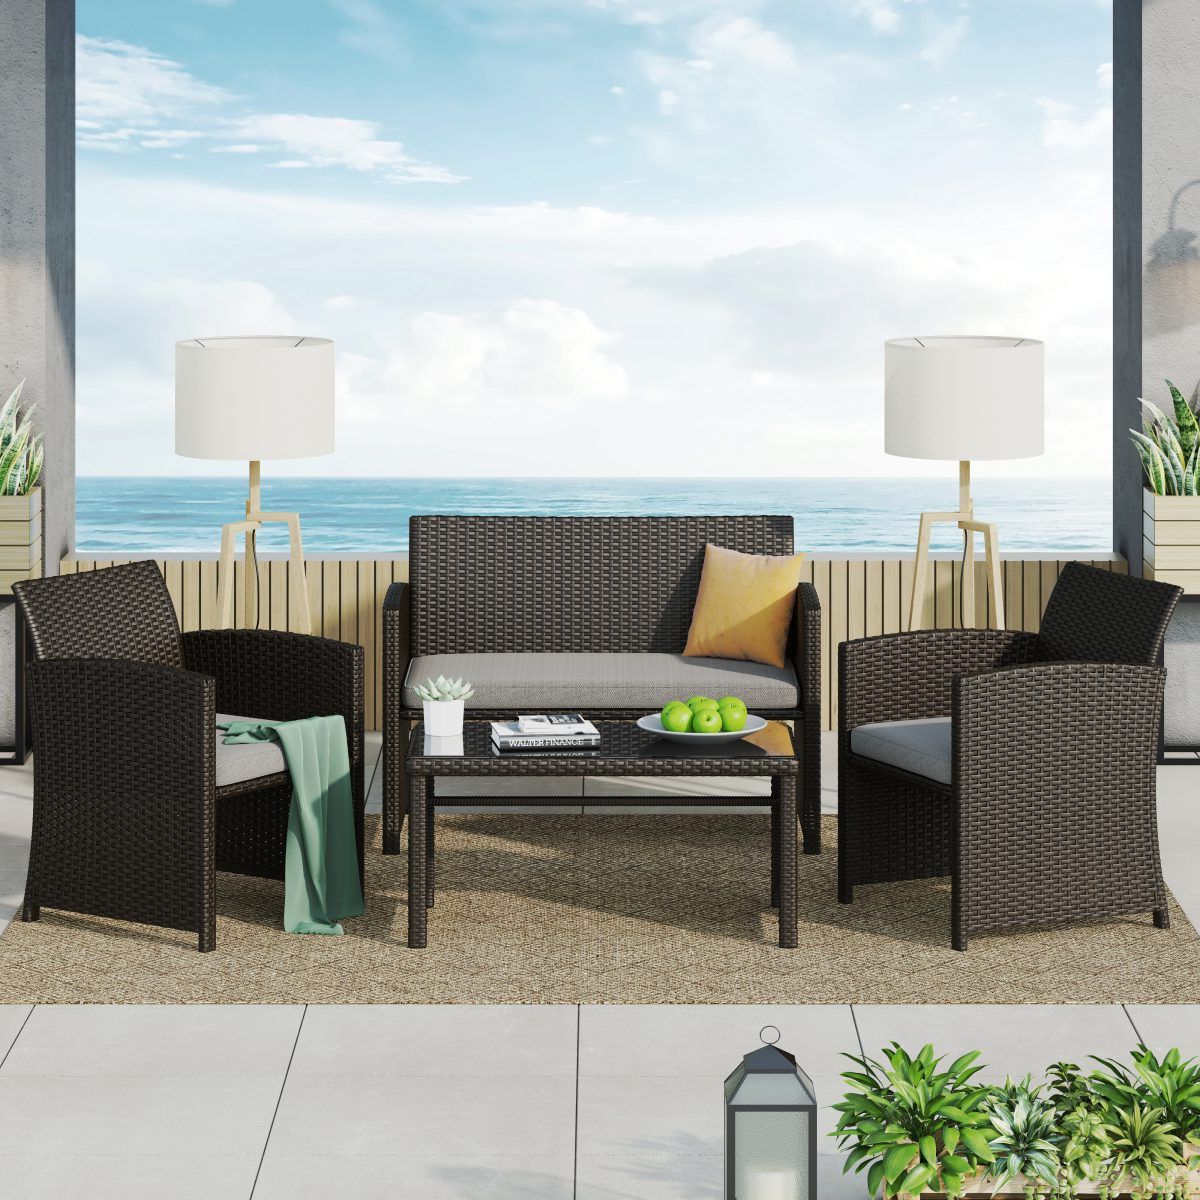 4 Piece Outdoor Wicker Seating Set In Brown Within Well Known Alsace 4 Piece Outdoor Brown Rattan Sofa Conversation Set With Cushions (View 11 of 15)